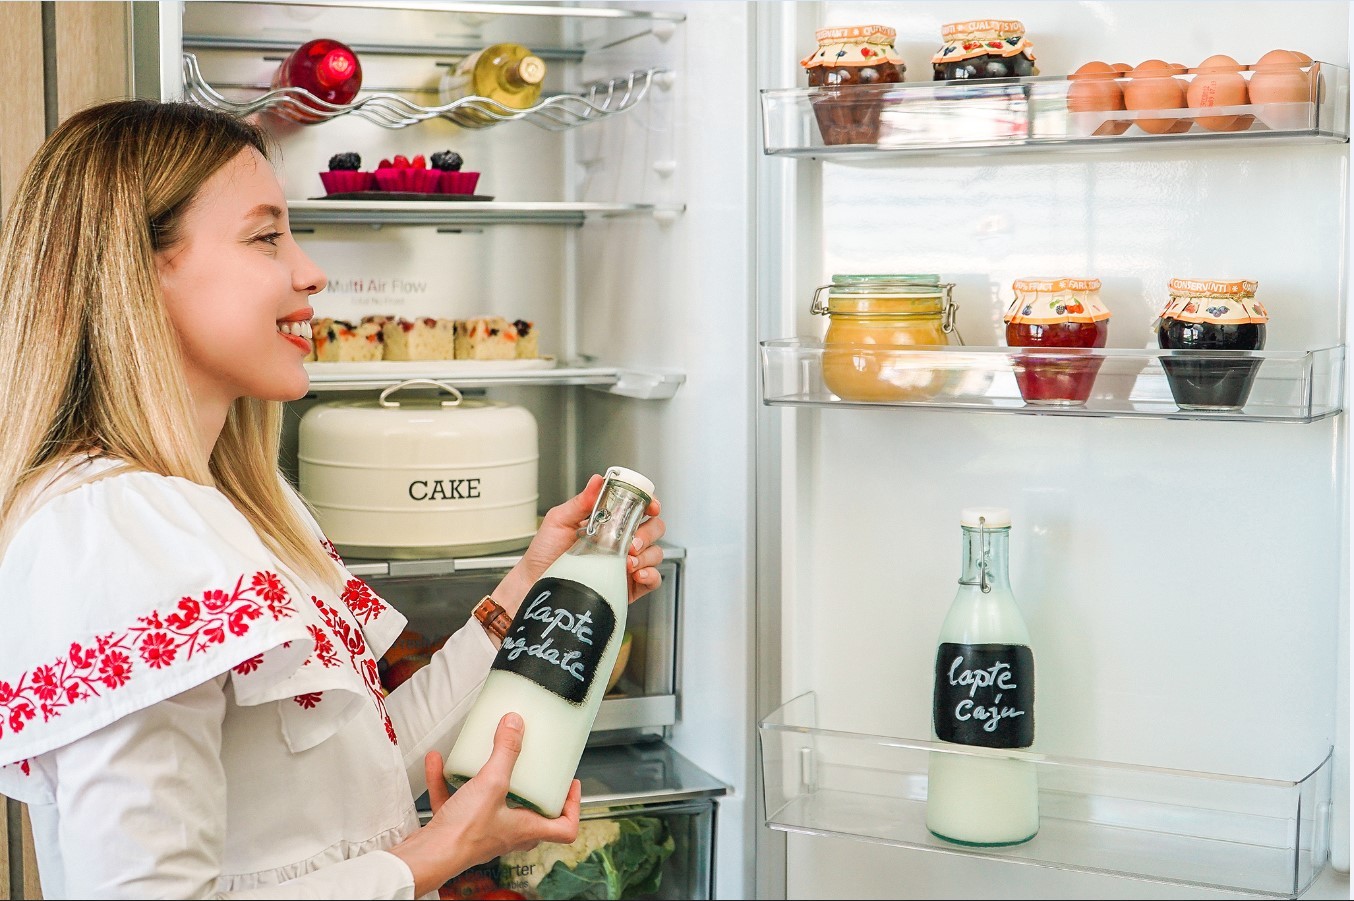 A look inside the LG refrigerator’s interior as a woman poses with a bottle of milk after taking it from one of the door’s shelves.